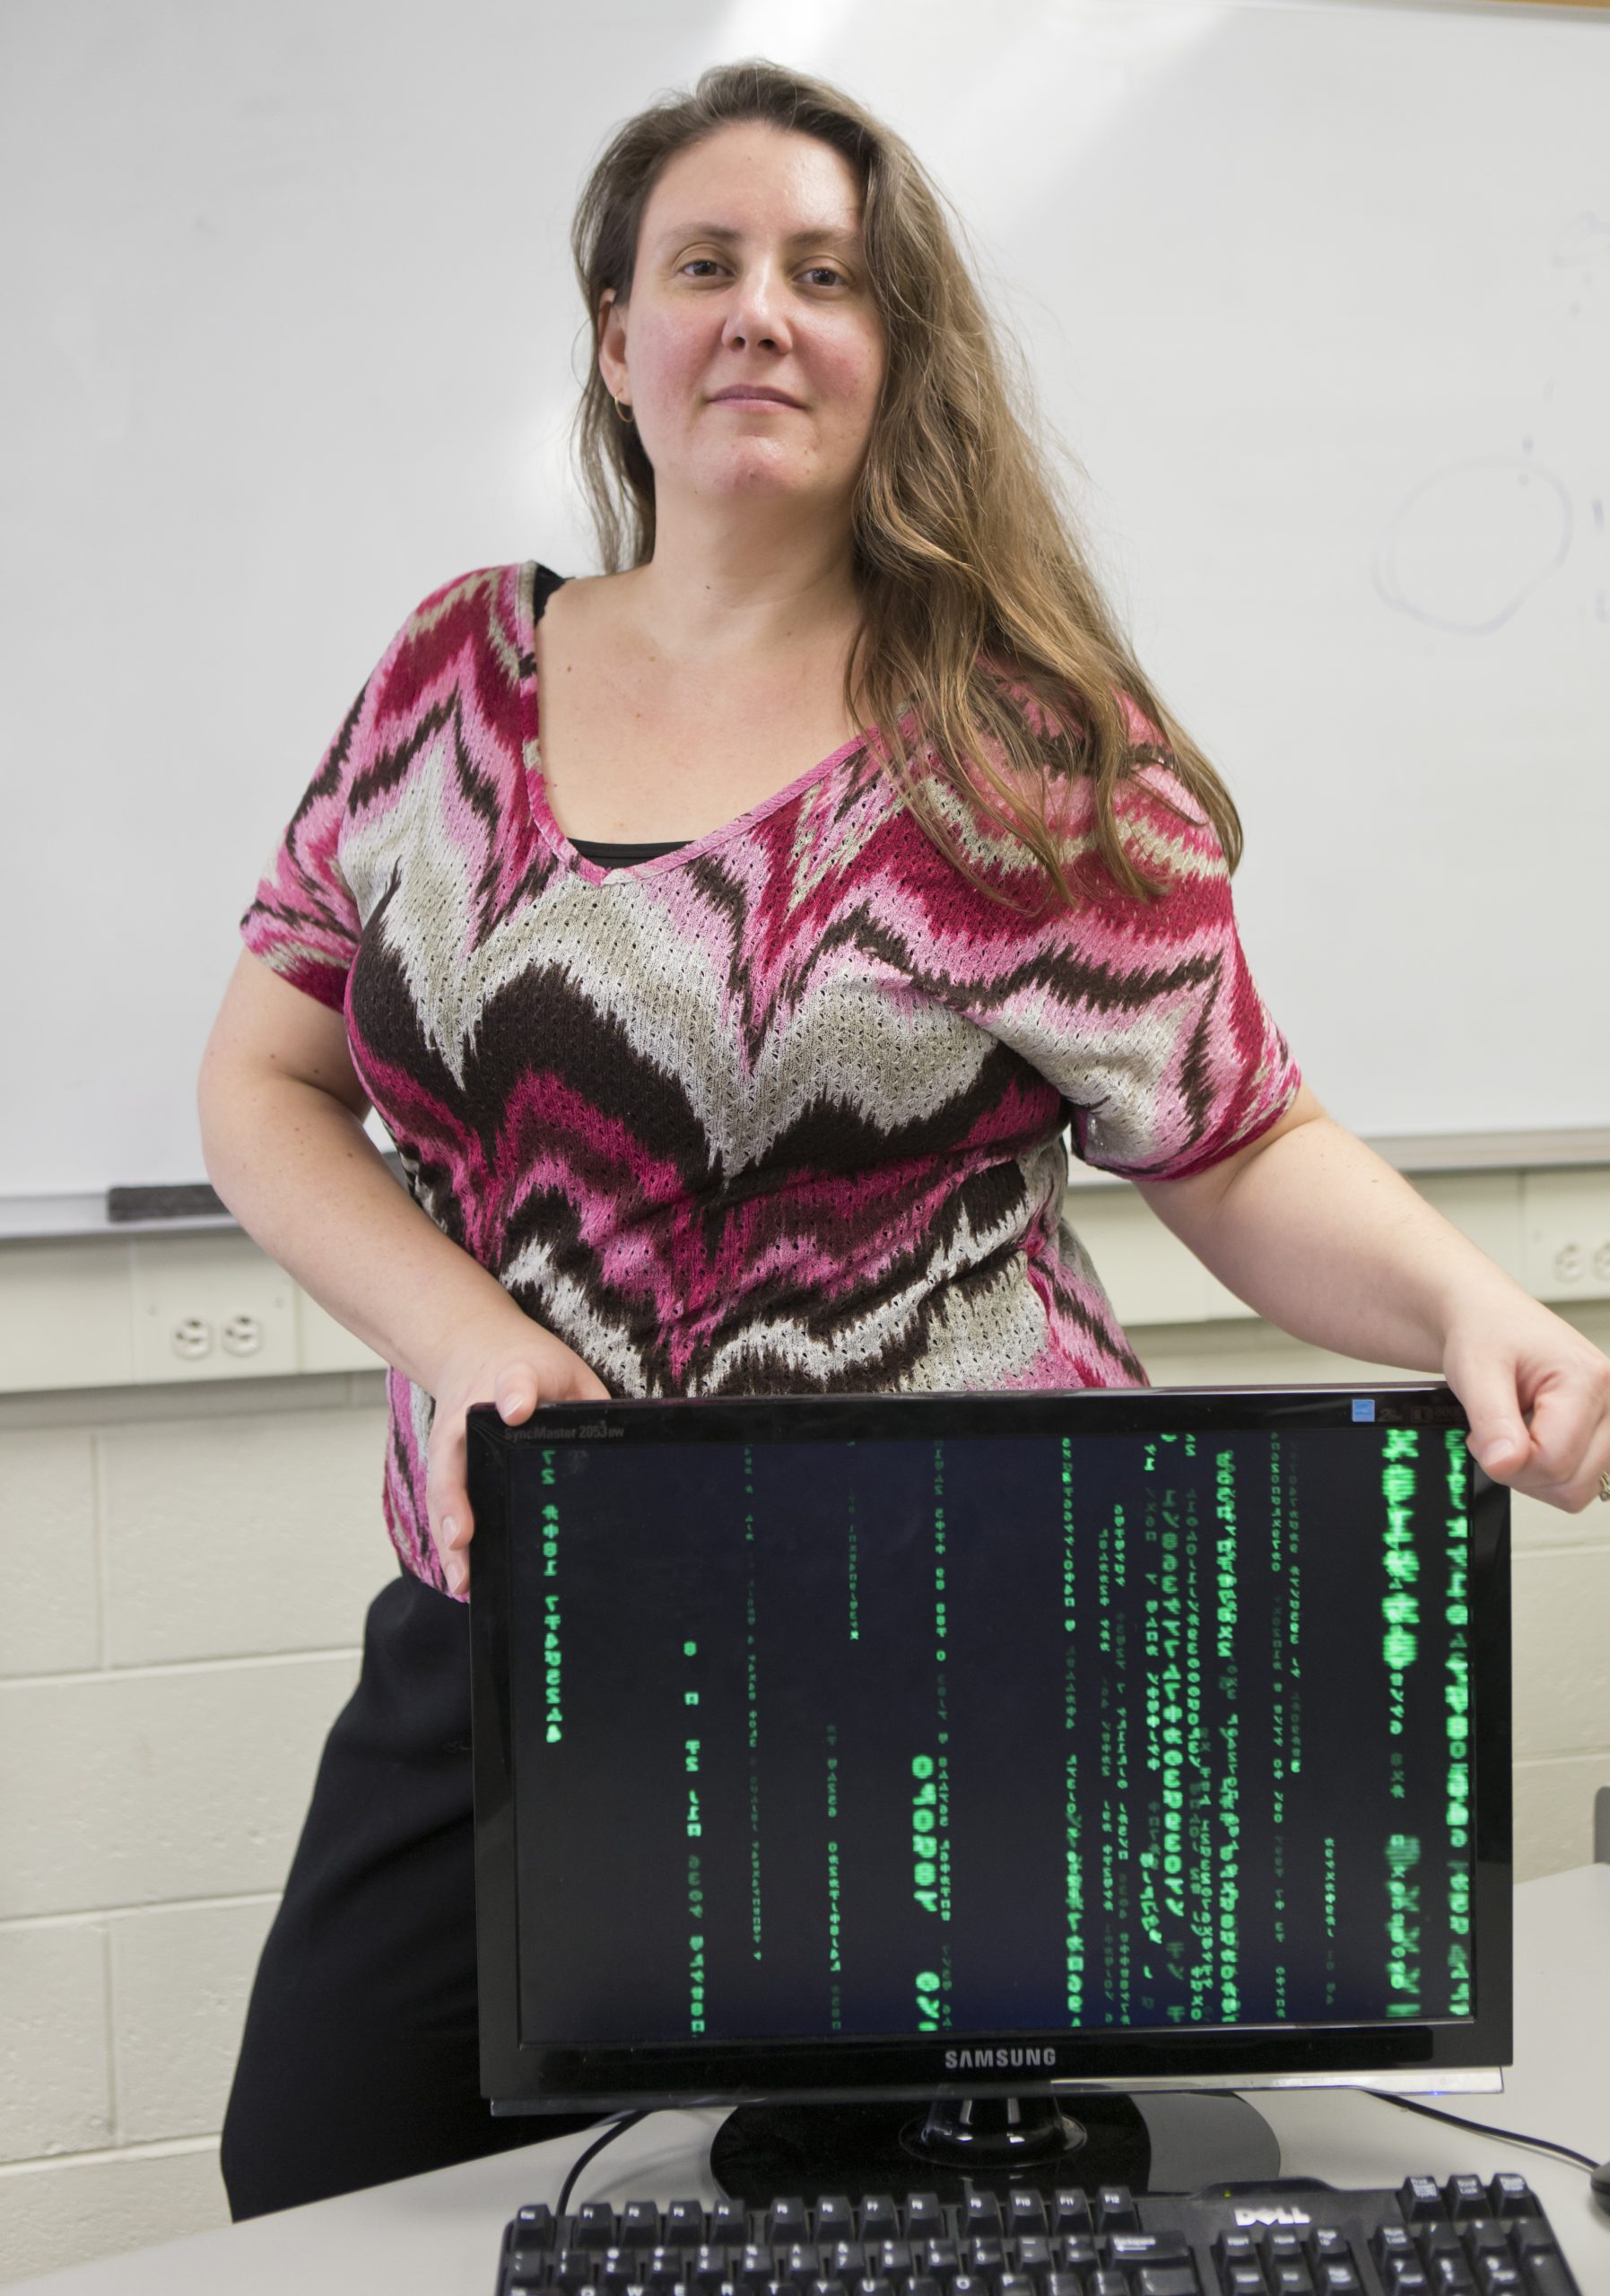 Jeanna Matthews posed in front of a computer screen showing code.